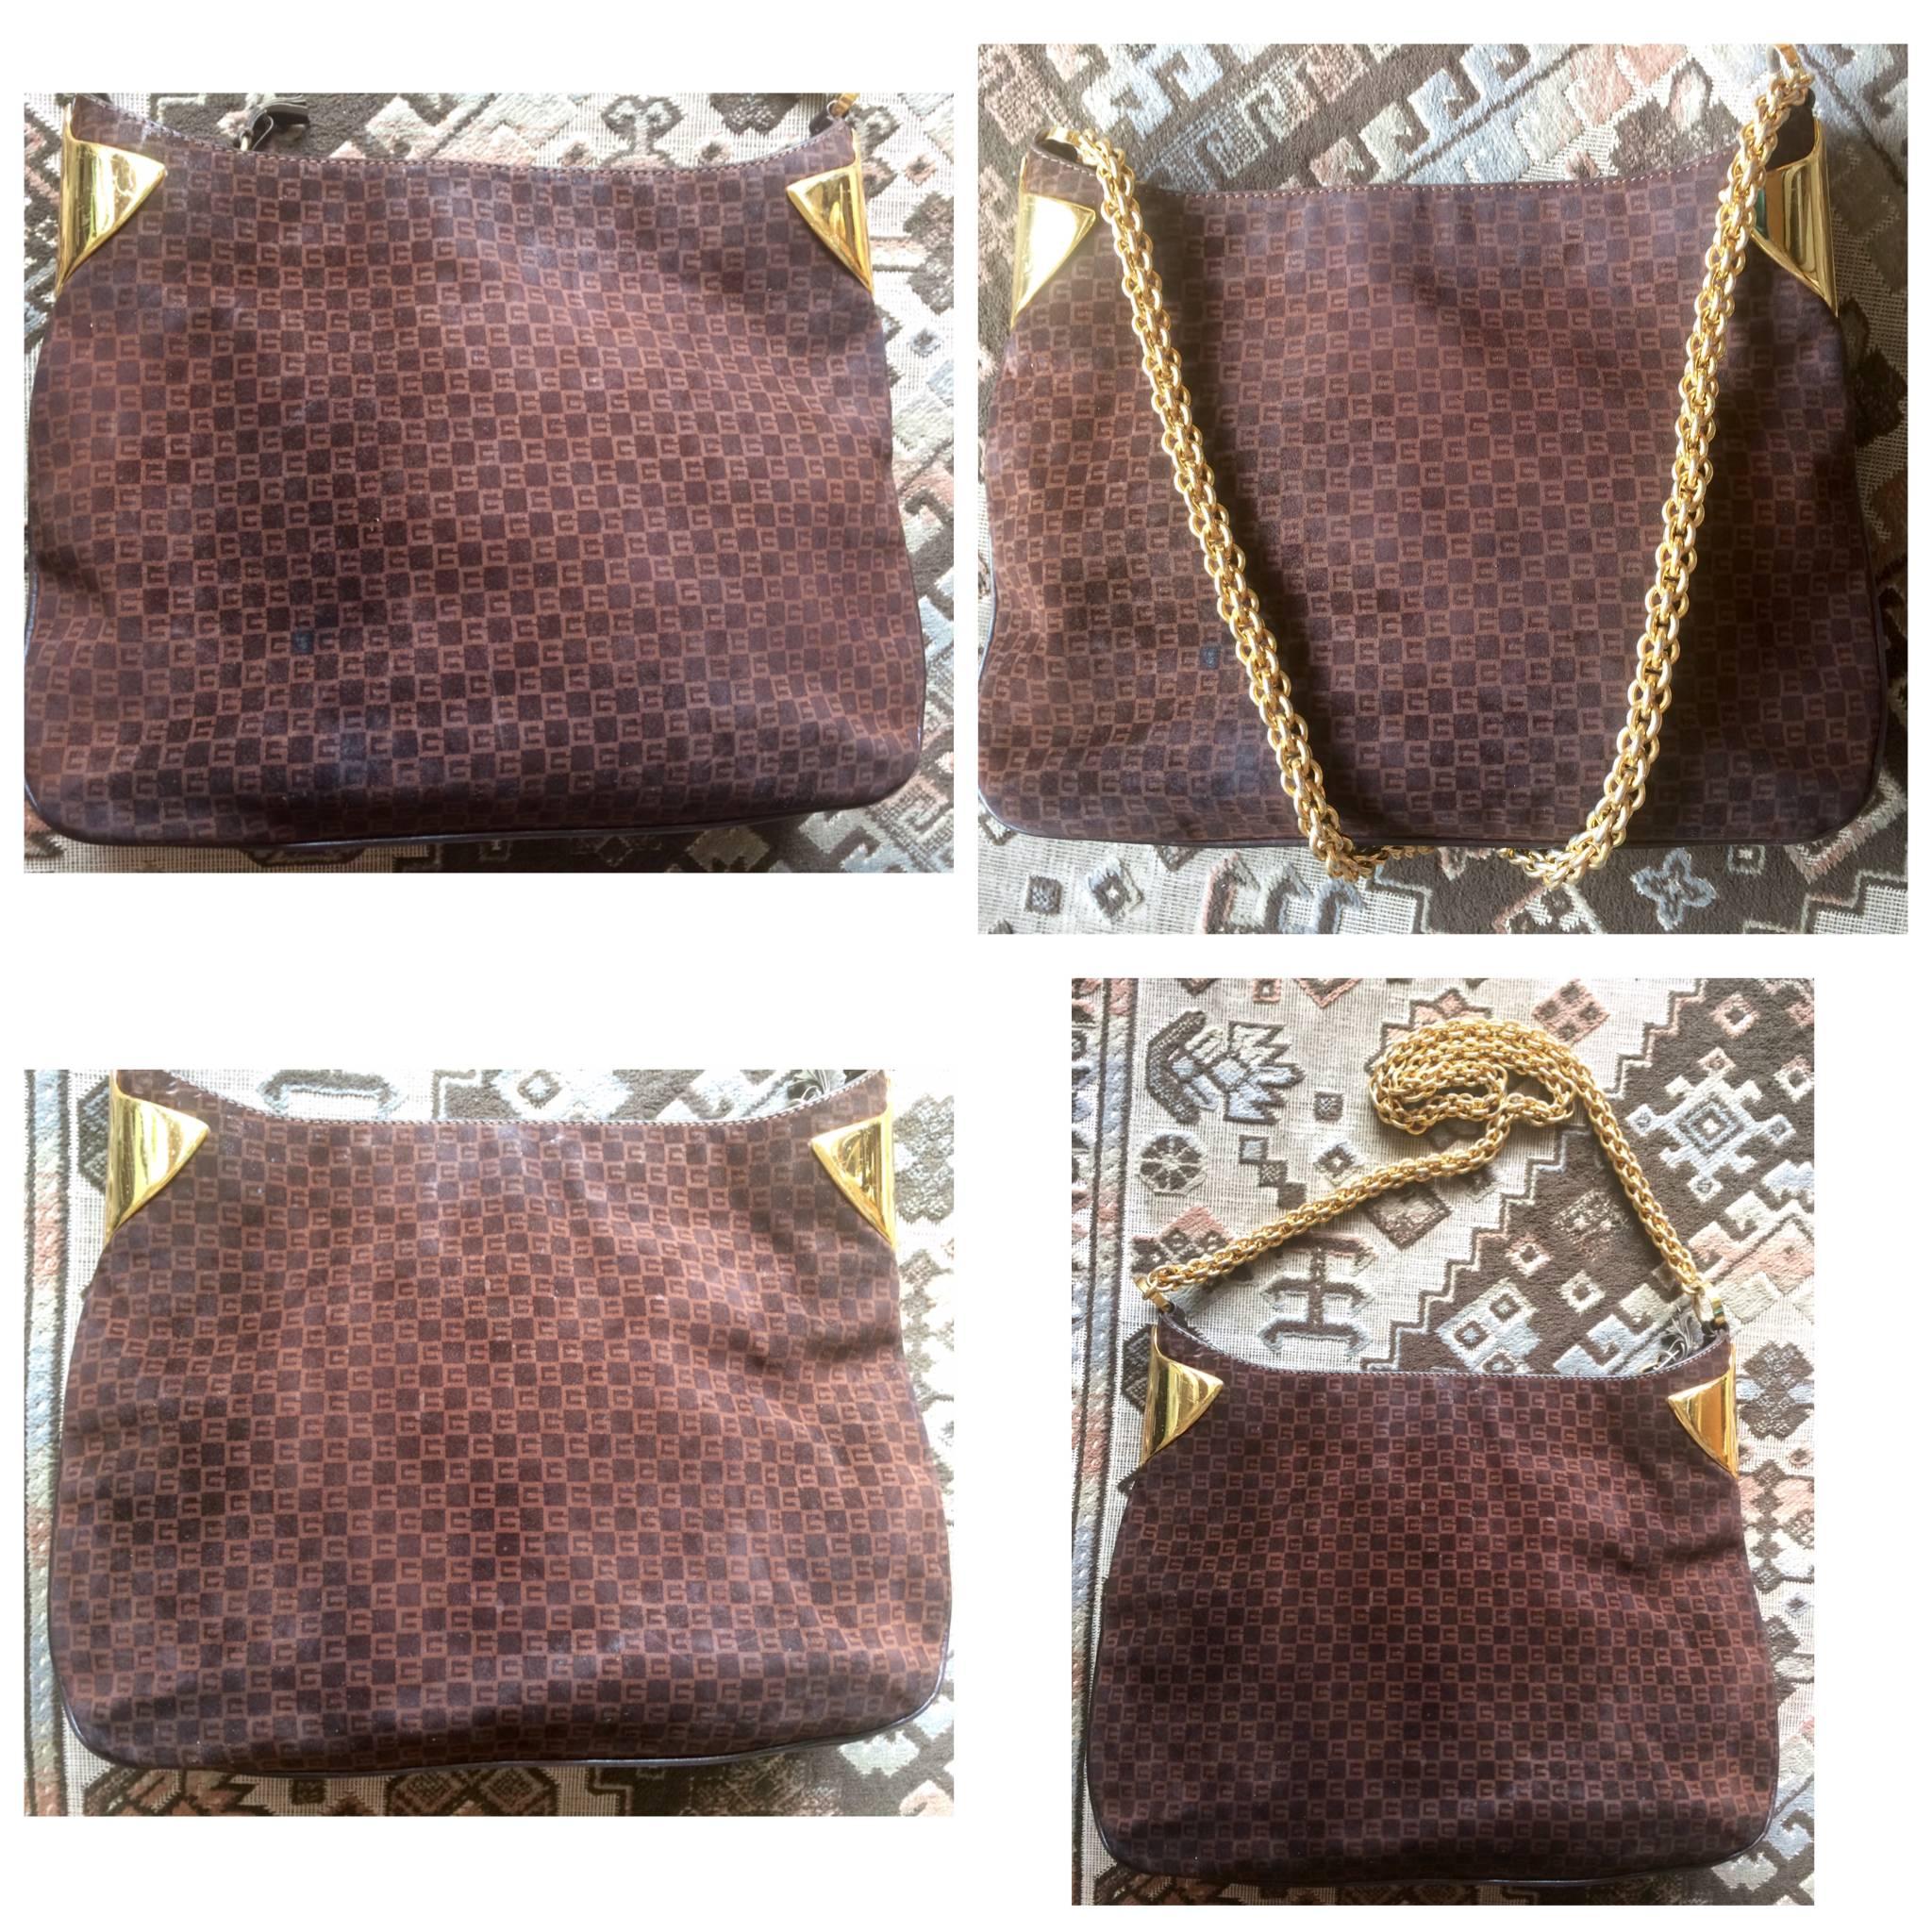 Vintage Gucci dark brown genuine suede leather chain shoulder bag with GG print  In Good Condition For Sale In Kashiwa, Chiba